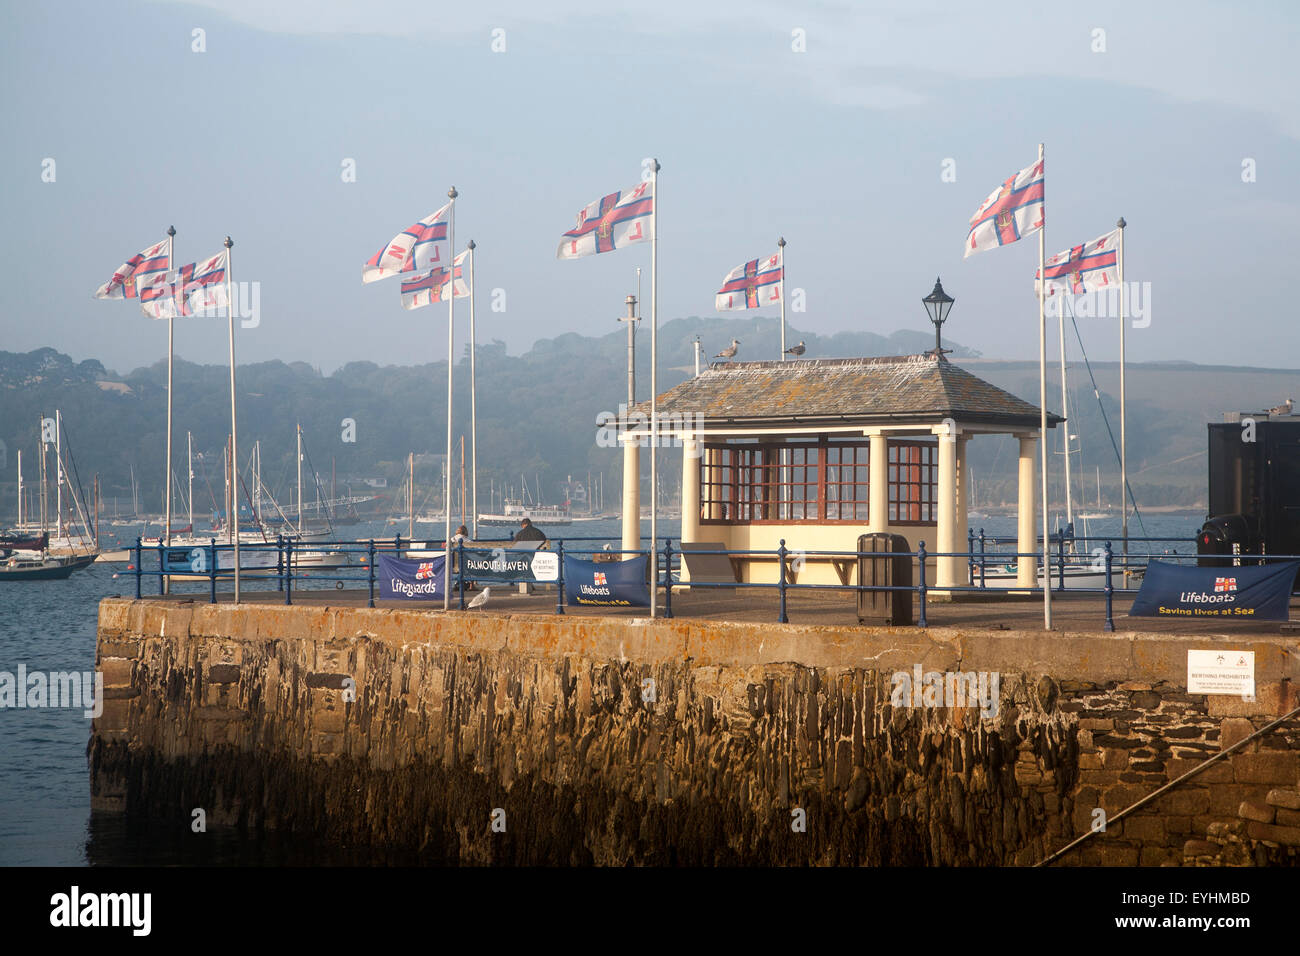 RNLI flags flying in the breeze on Prince of Wales pier, Falmouth, Cornwall, England, UK Stock Photo